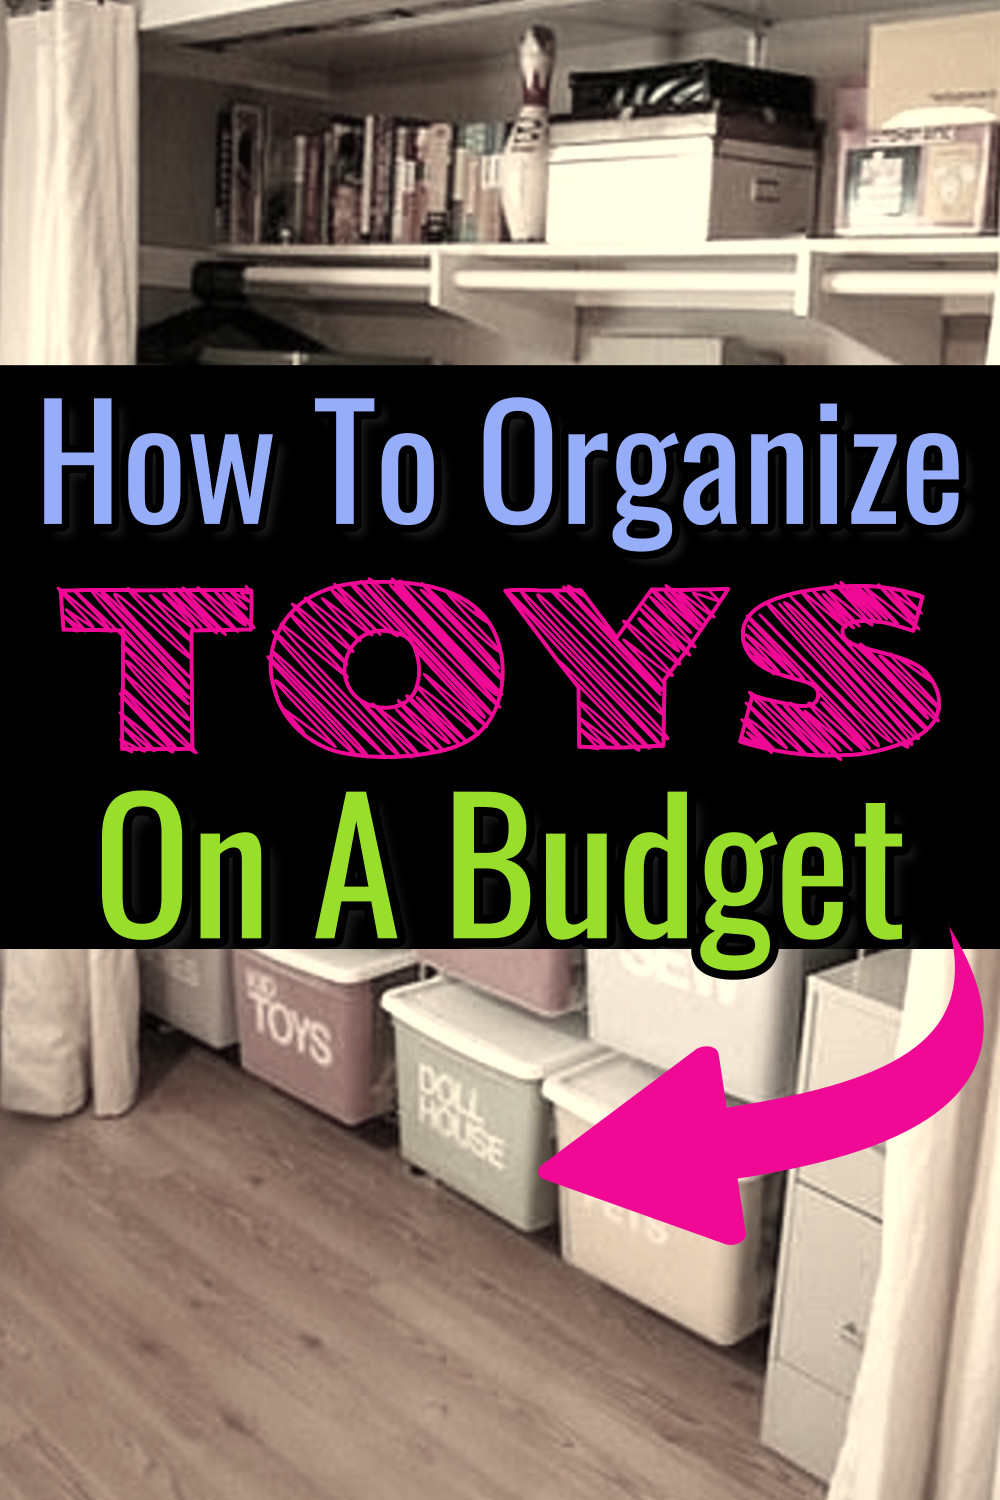 Organizing Toys - let's declutter and organize toys in the playroom, living room, bedroom, in your kids toy closet or their room even if you're on a budget with these cheap DIY Dollar Store toy storage ideas for small spaces. Organizing toys in kids rooms and other toys storage solutions for small spaces - organize kids toys, games, books, stuffed animals, action figures, hot wheels and legos with these home organization ideas and tips - this is how to organize toys and declutter toy clutter